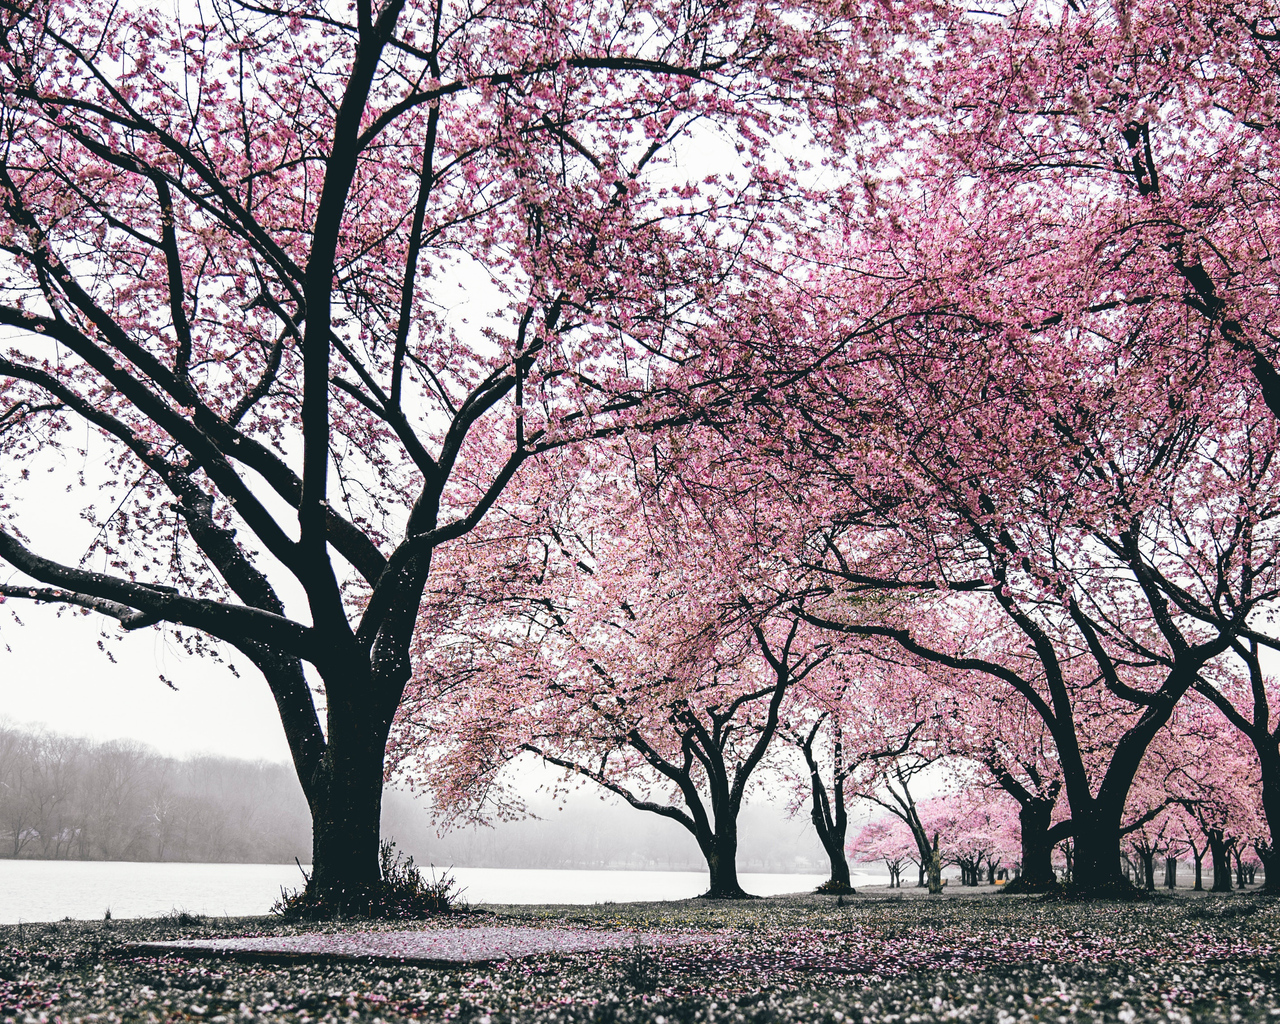 Cherry Blossoms Wallpapers